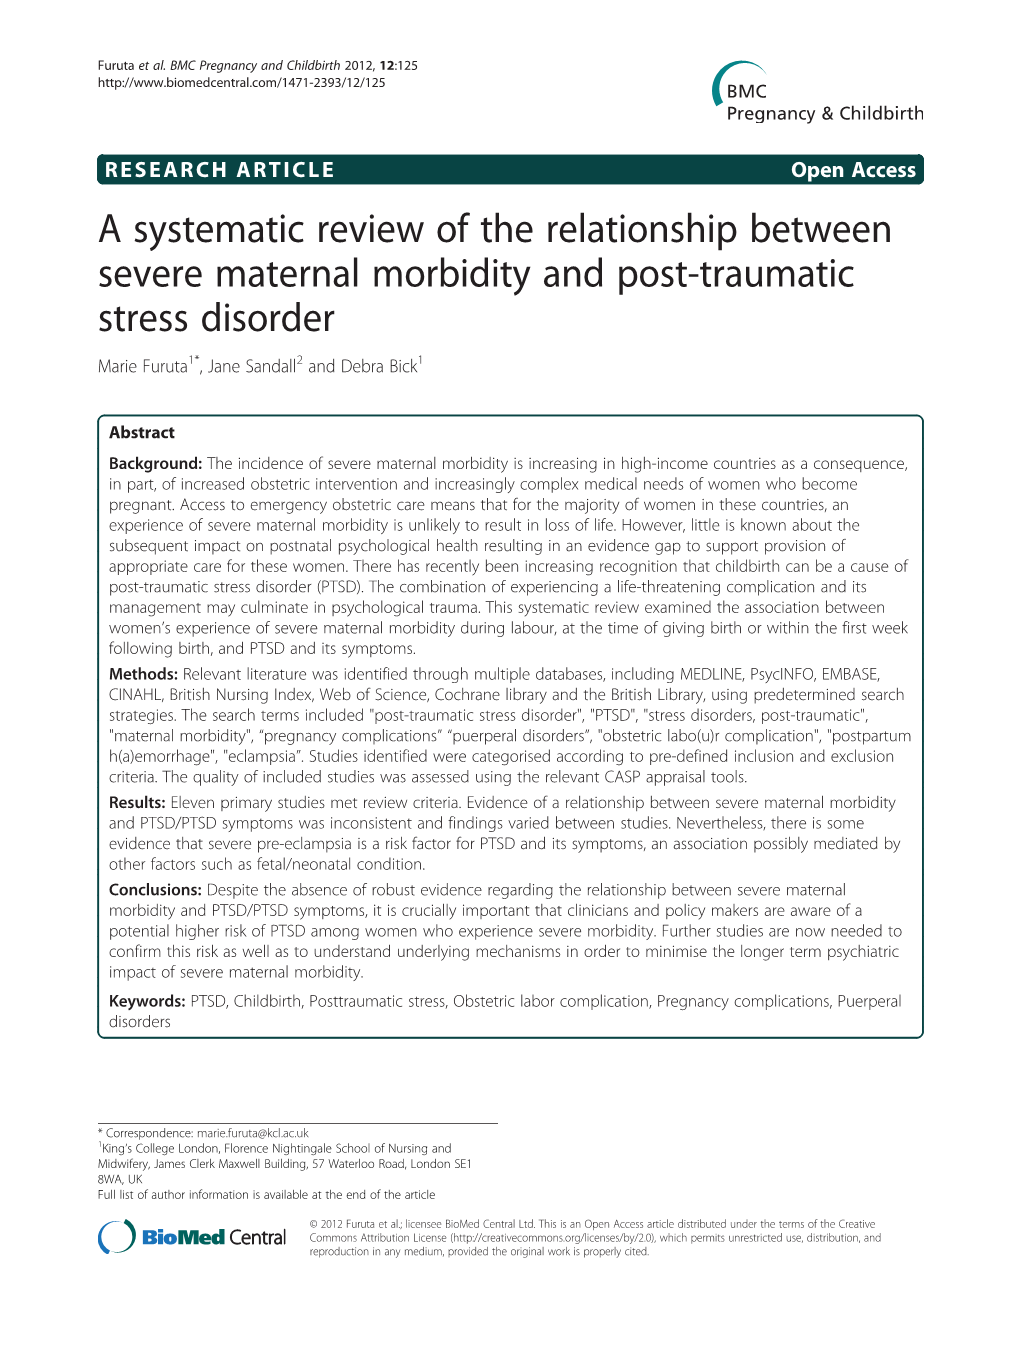 A Systematic Review of the Relationship Between Severe Maternal Morbidity and Post-Traumatic Stress Disorder Marie Furuta1*, Jane Sandall2 and Debra Bick1